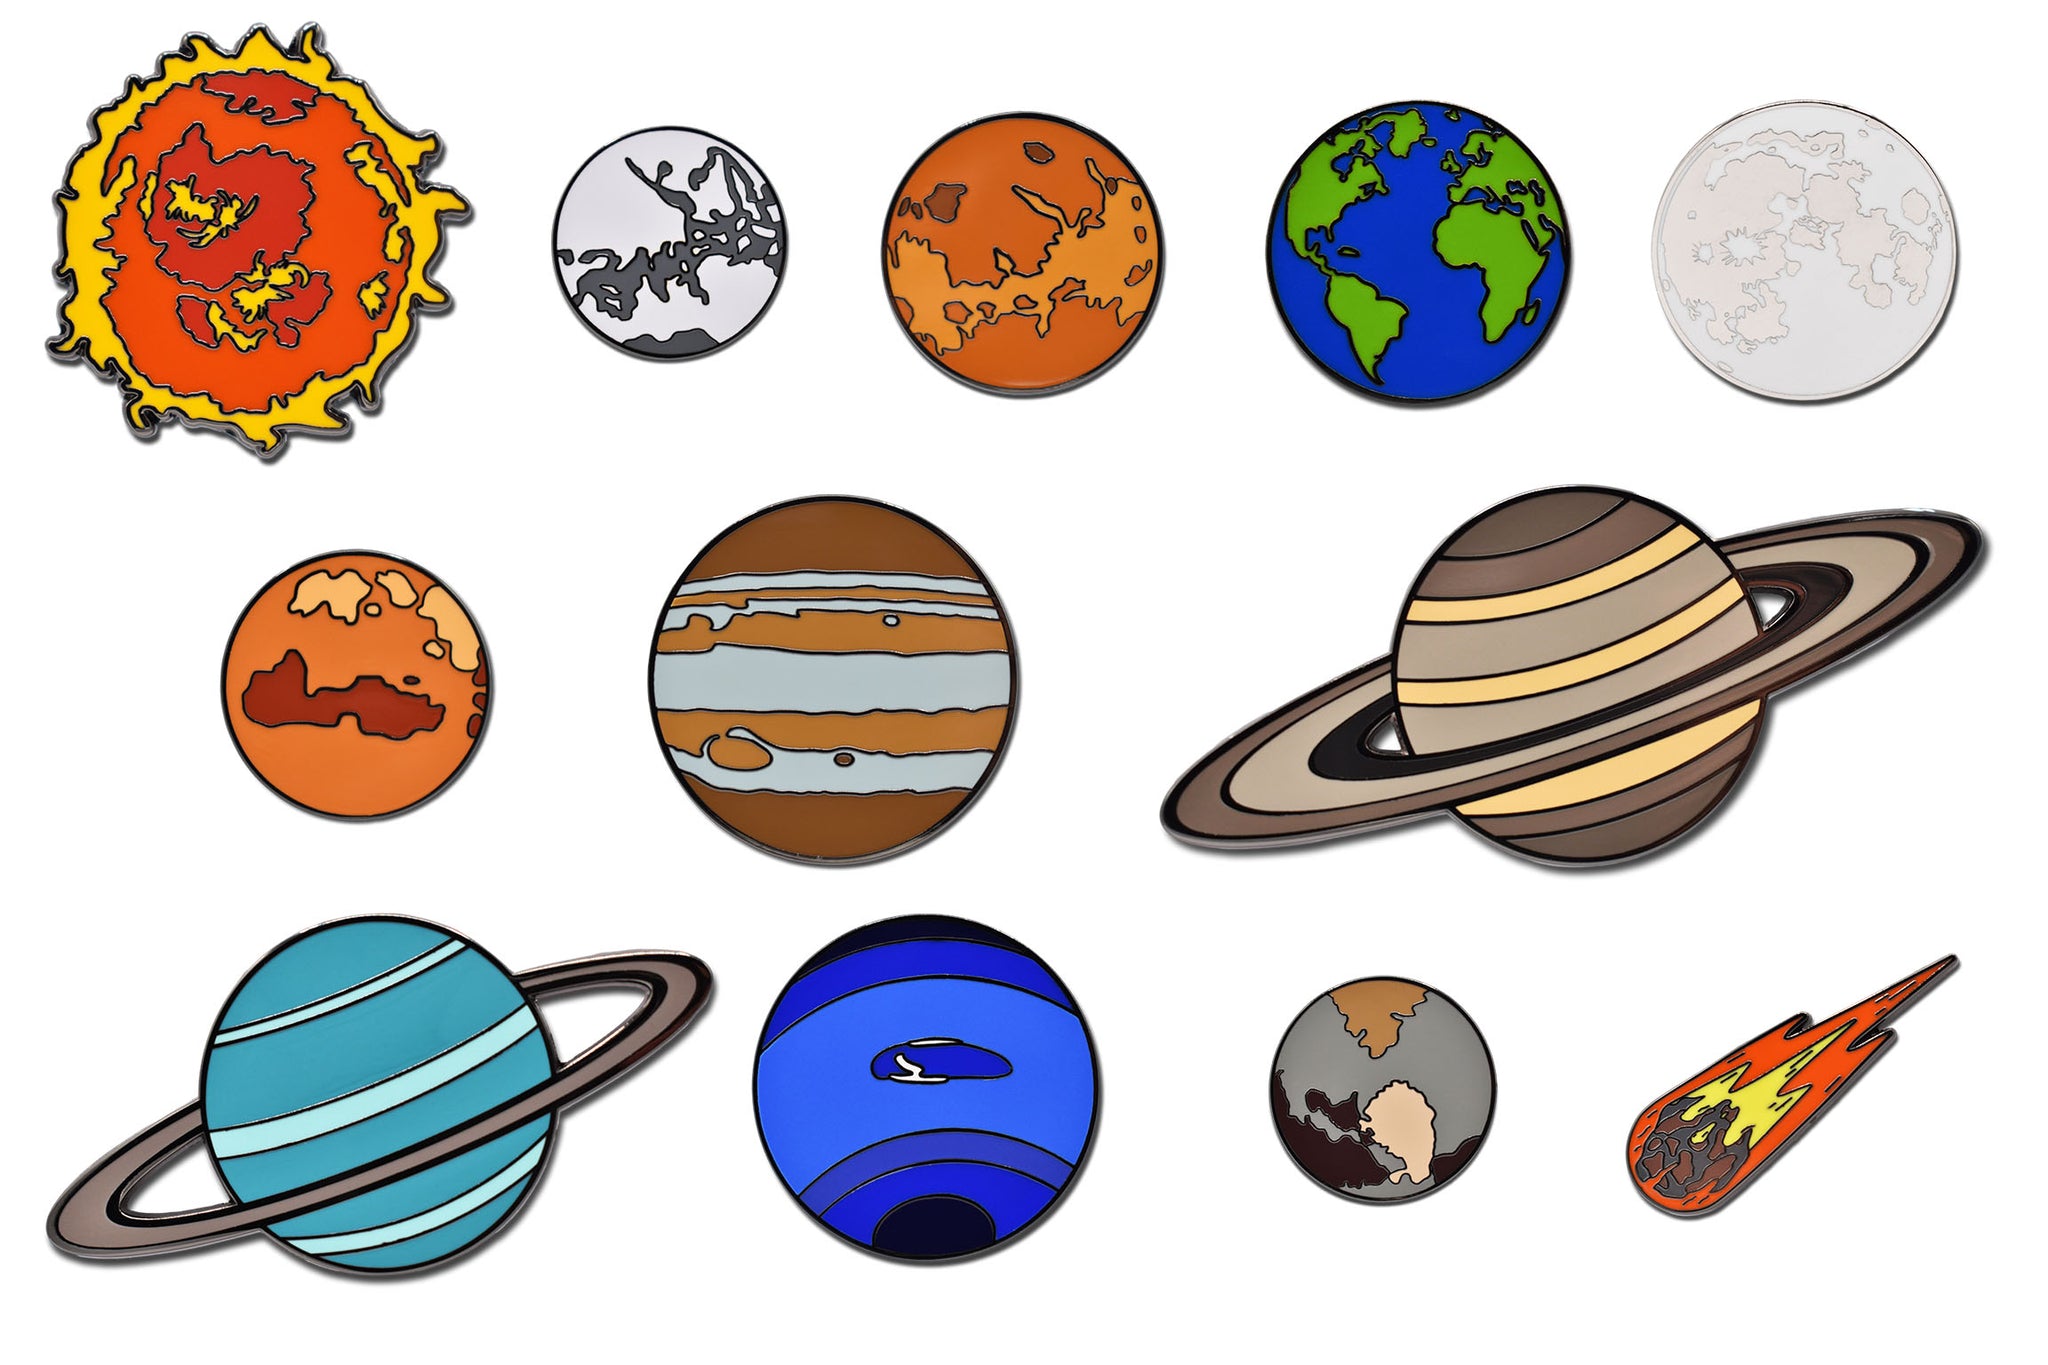 planets in the solar system clipart